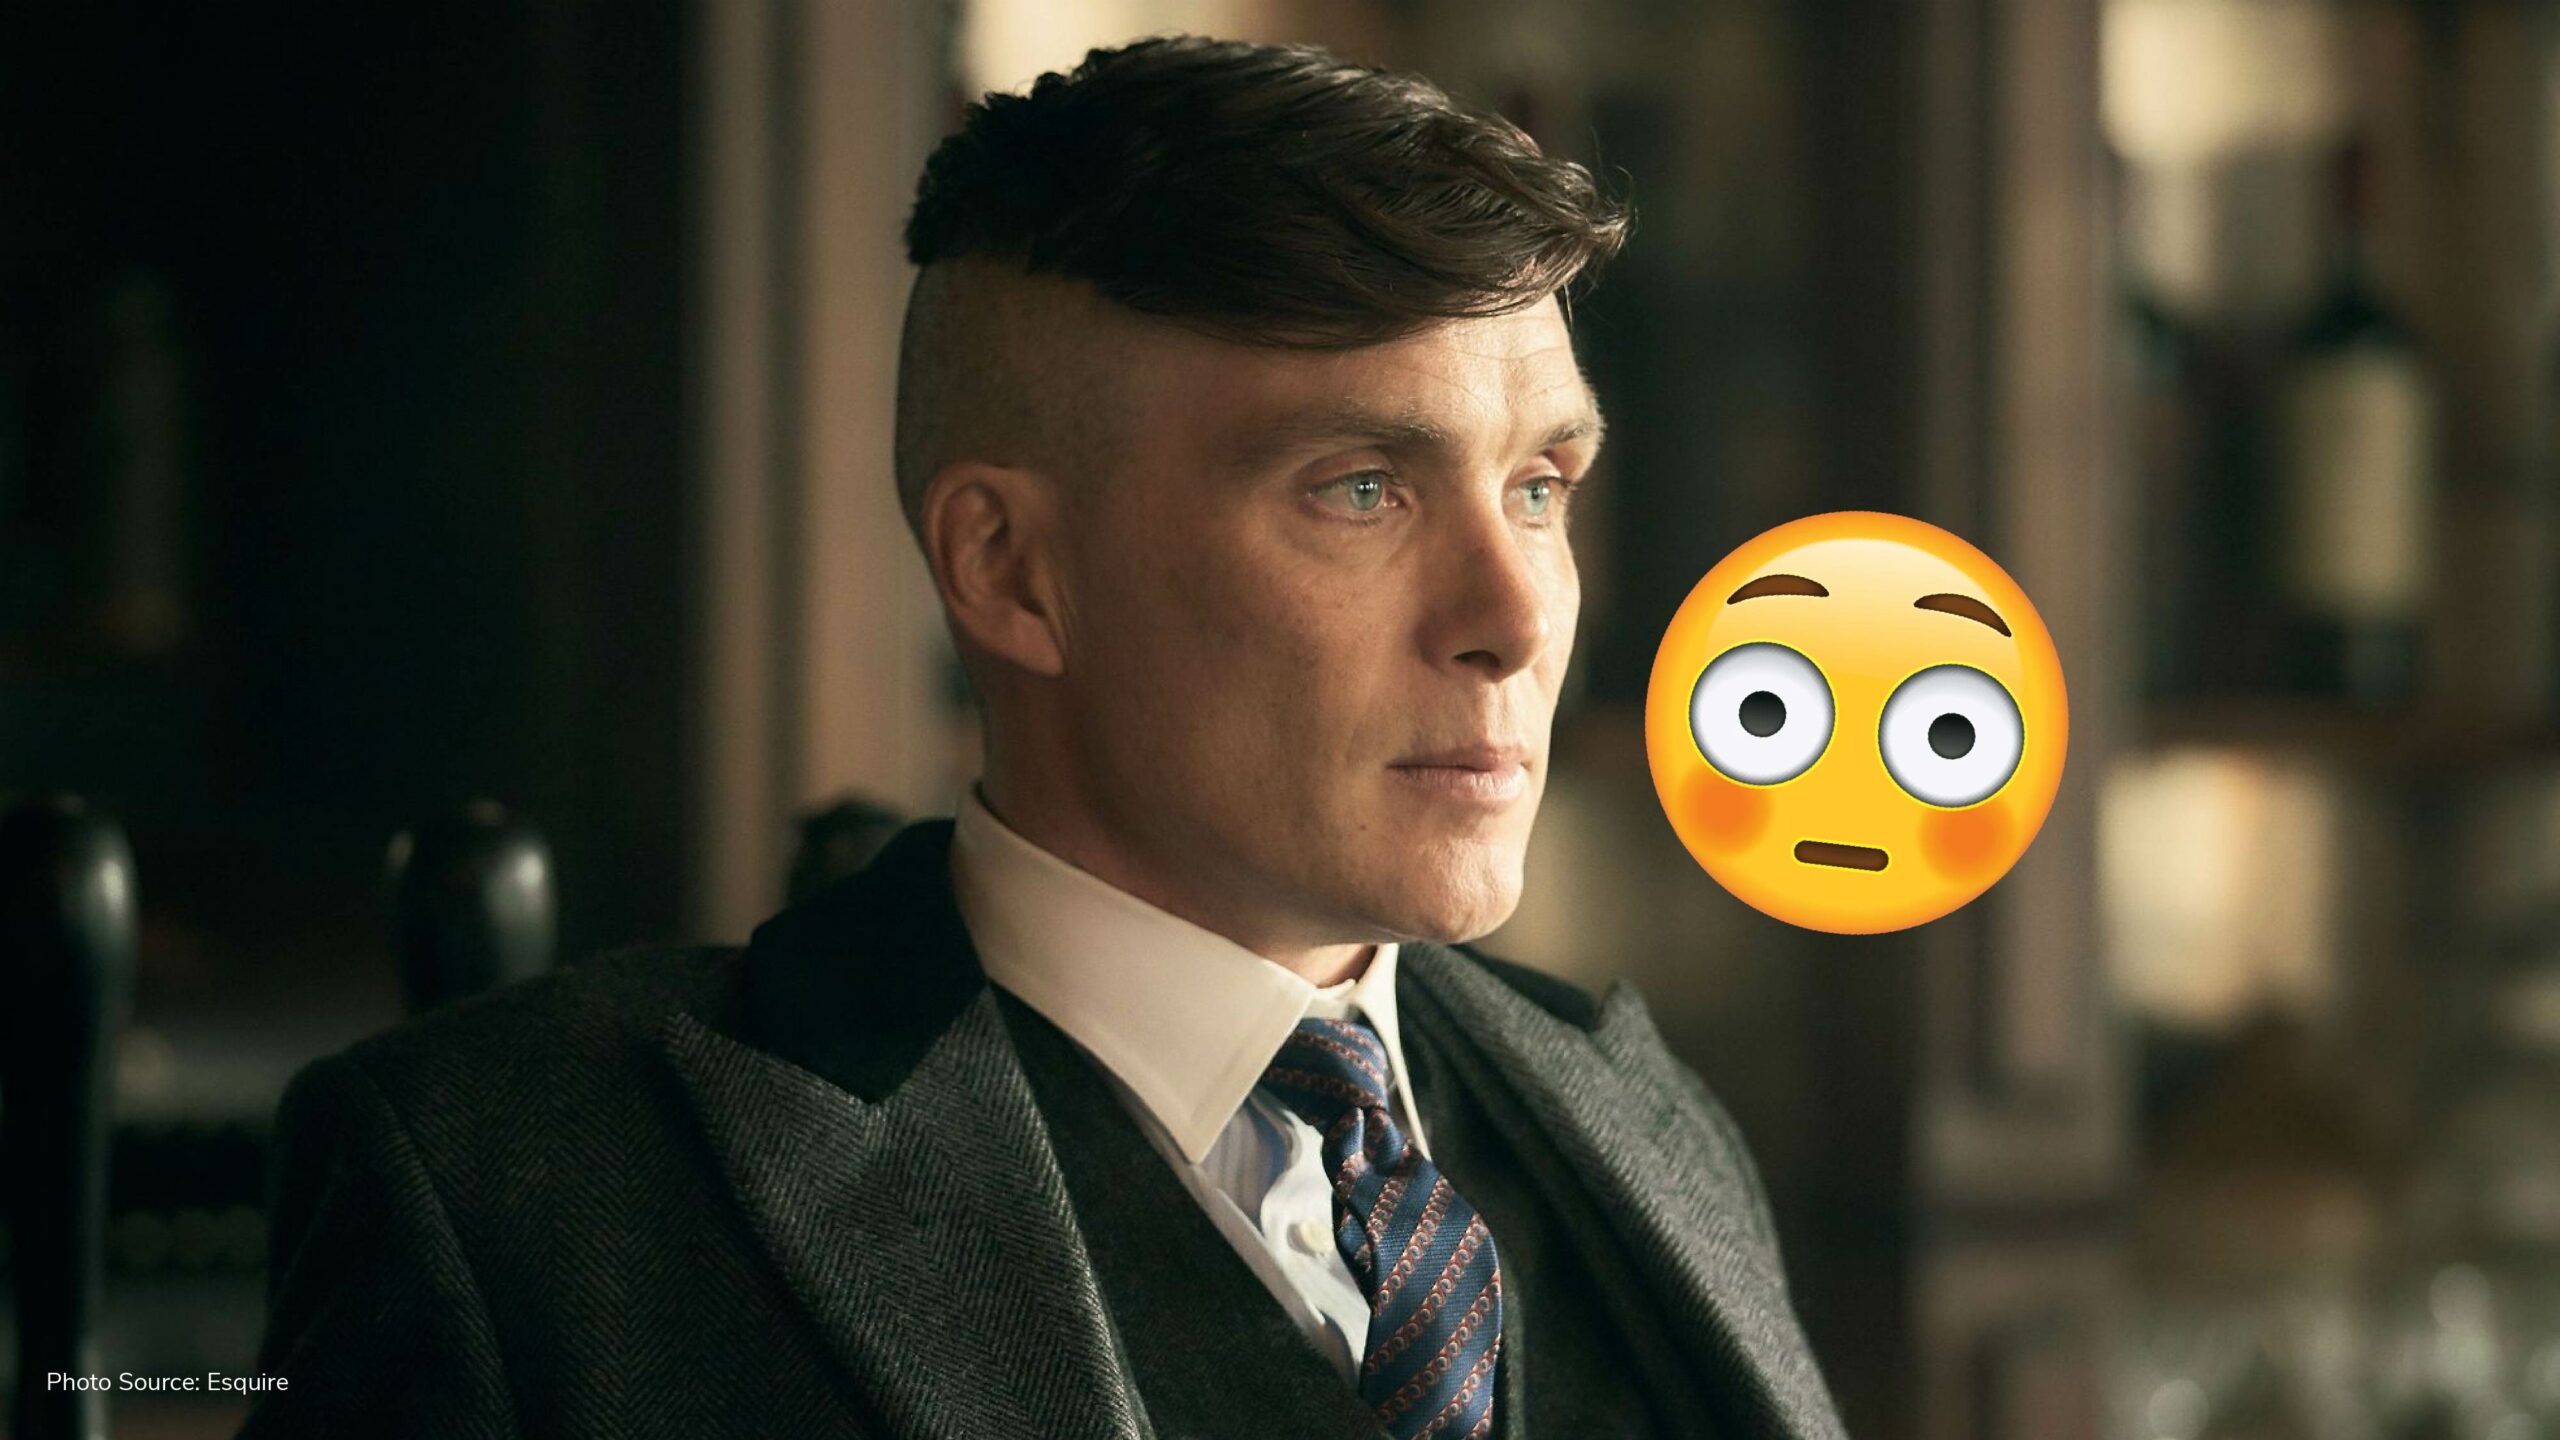 The Peaky Blinders universe may continue without Cillian Murphy